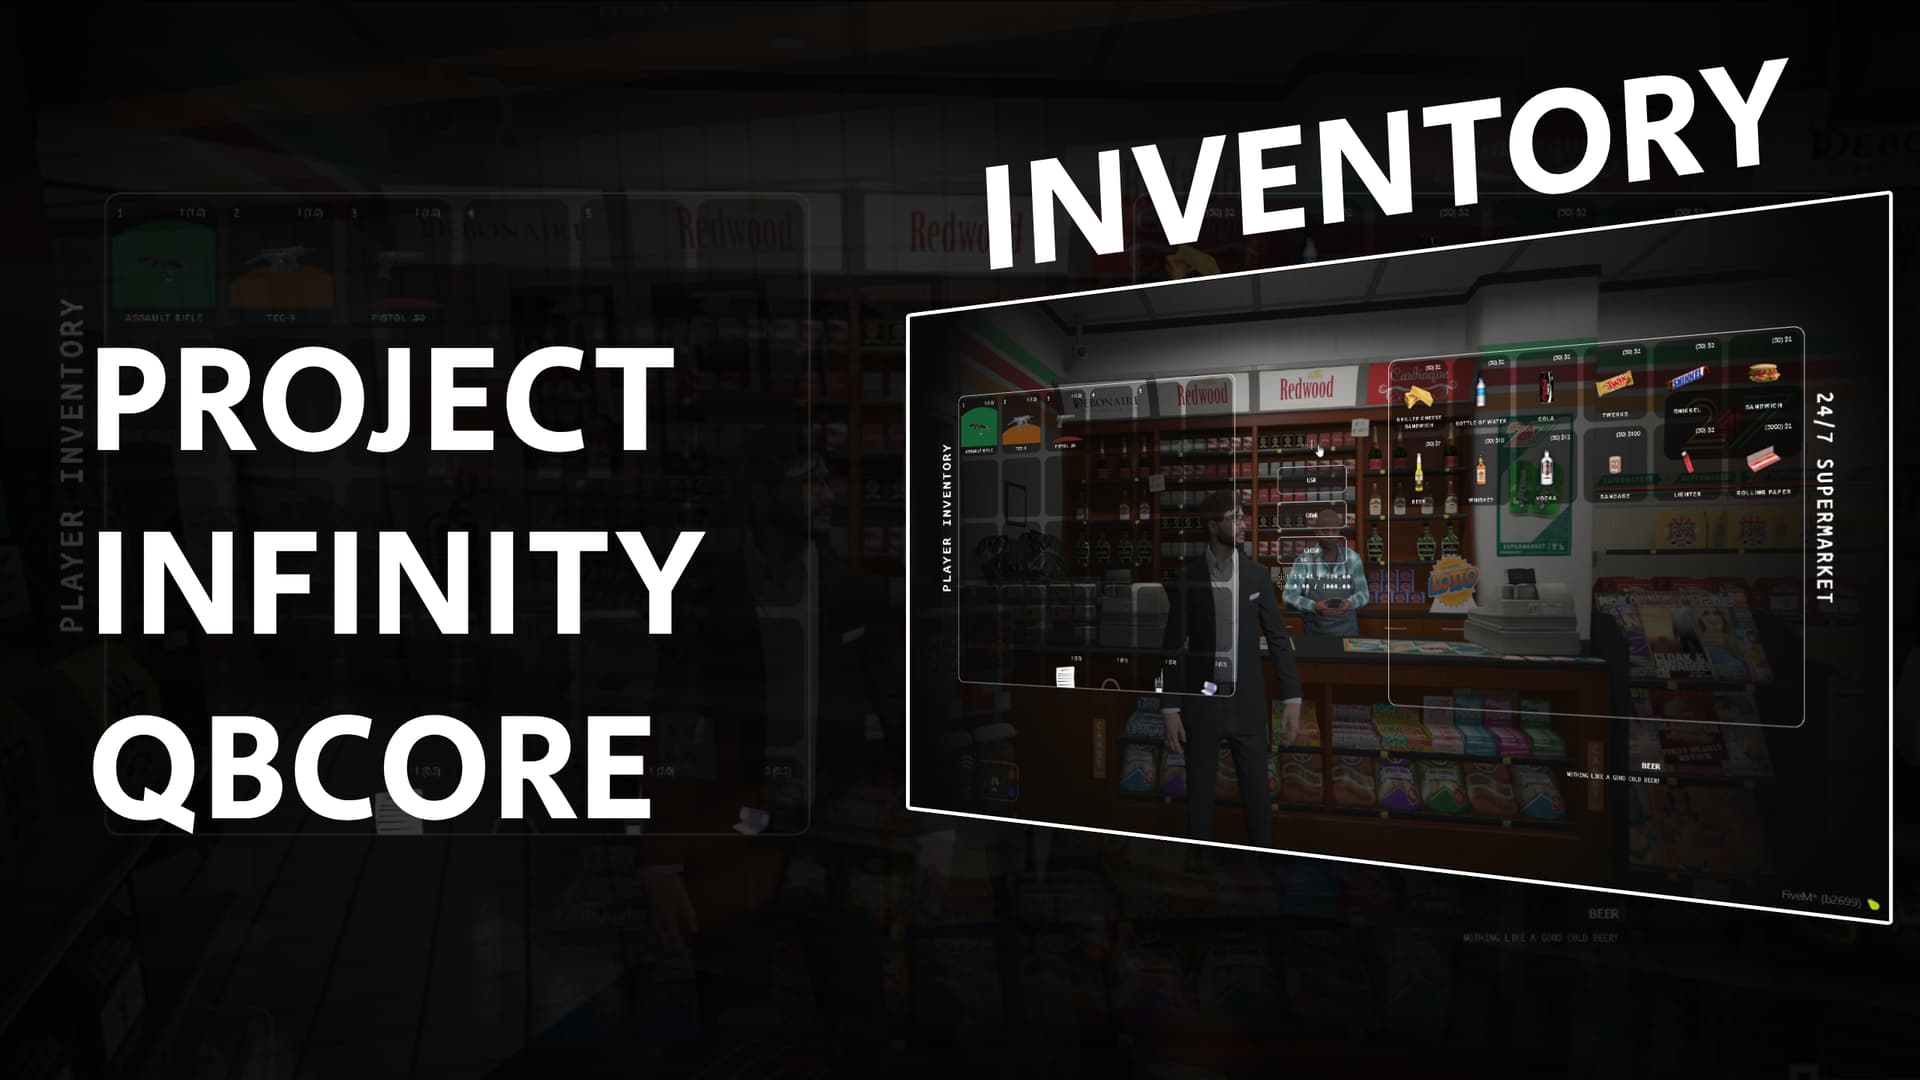 QBCORE Infinity Inventory (Highly Optimised & New Design) Releases